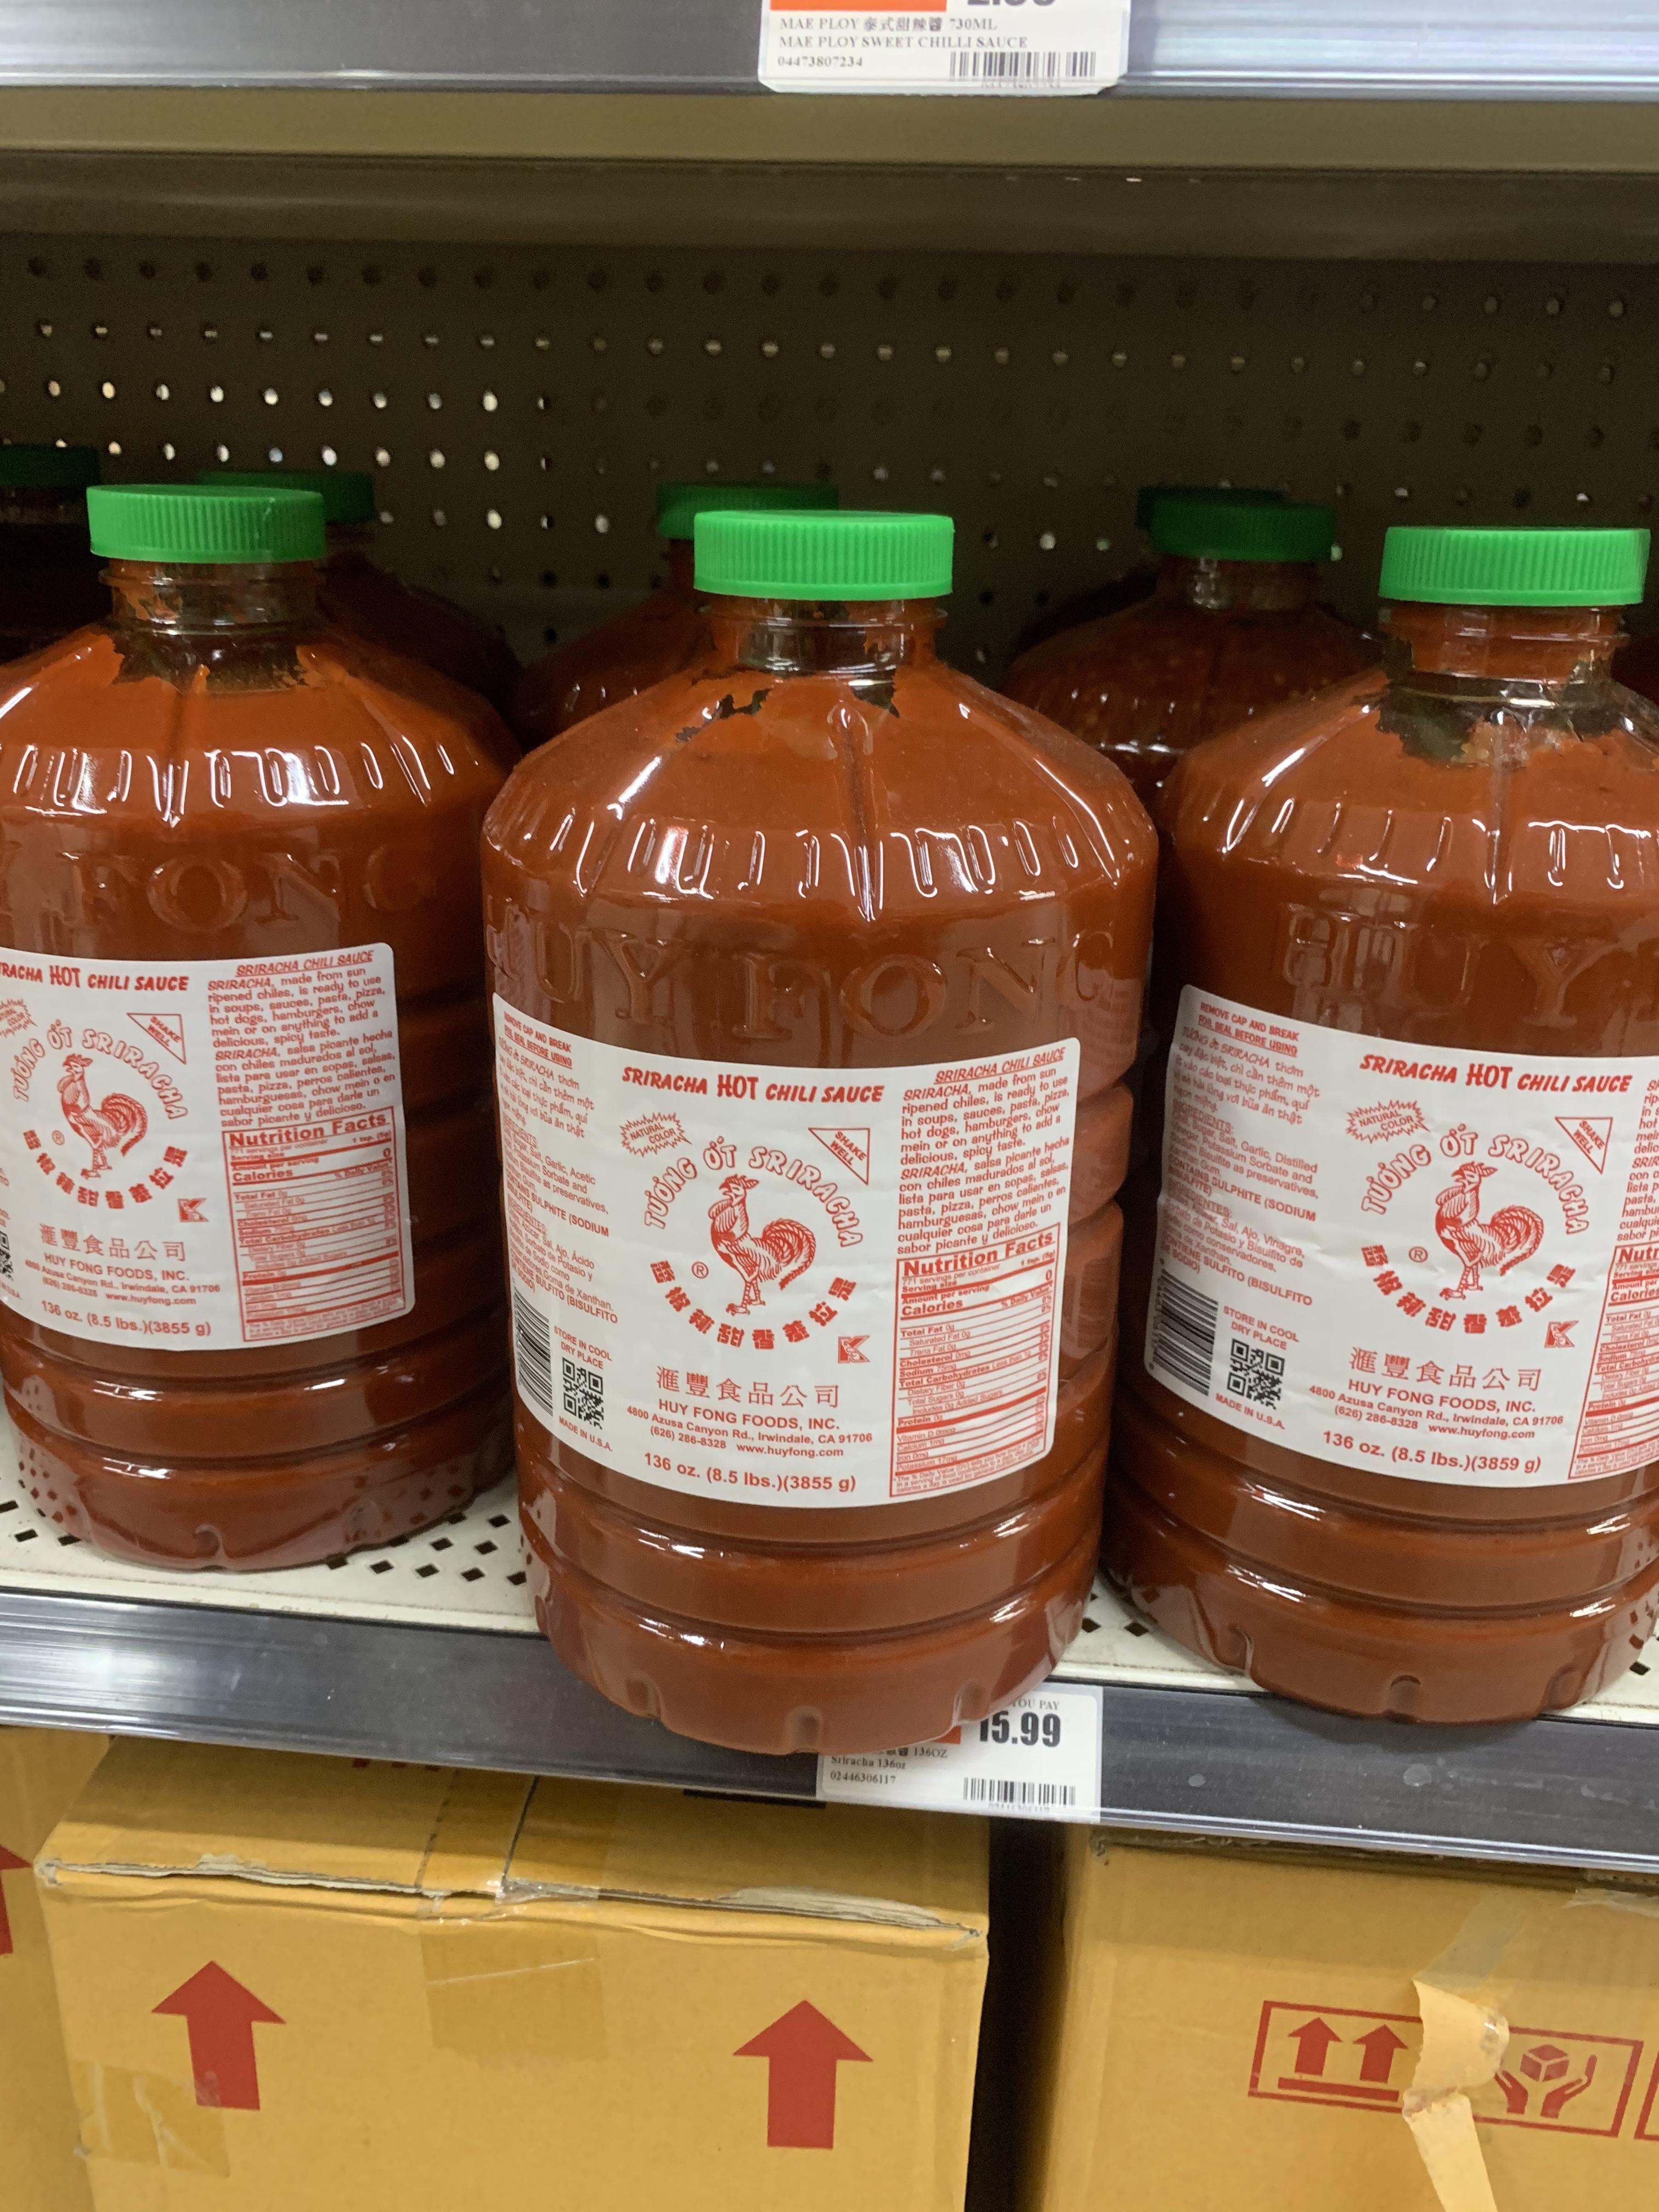 Apparently you can buy sriracha buy the pound. 